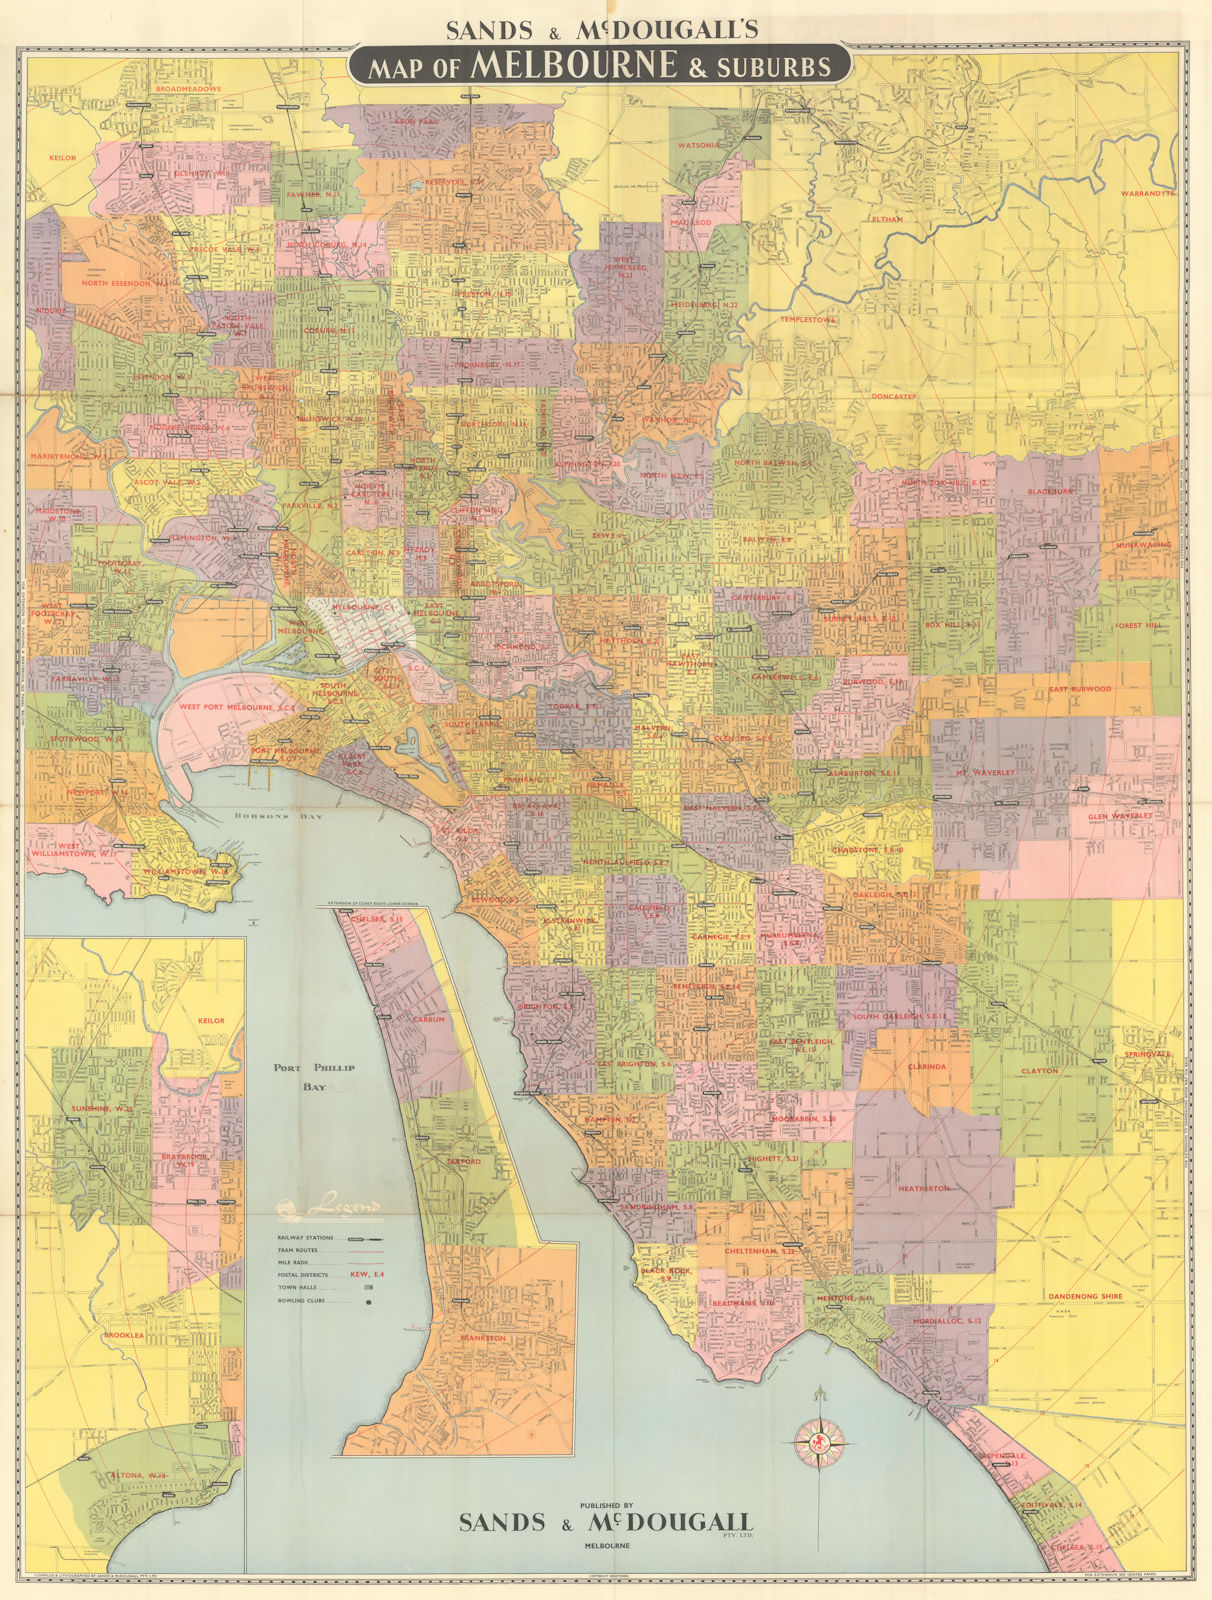 Map of Melbourne and Suburbs by Sands & McDougall. 114x86cm 1959 old